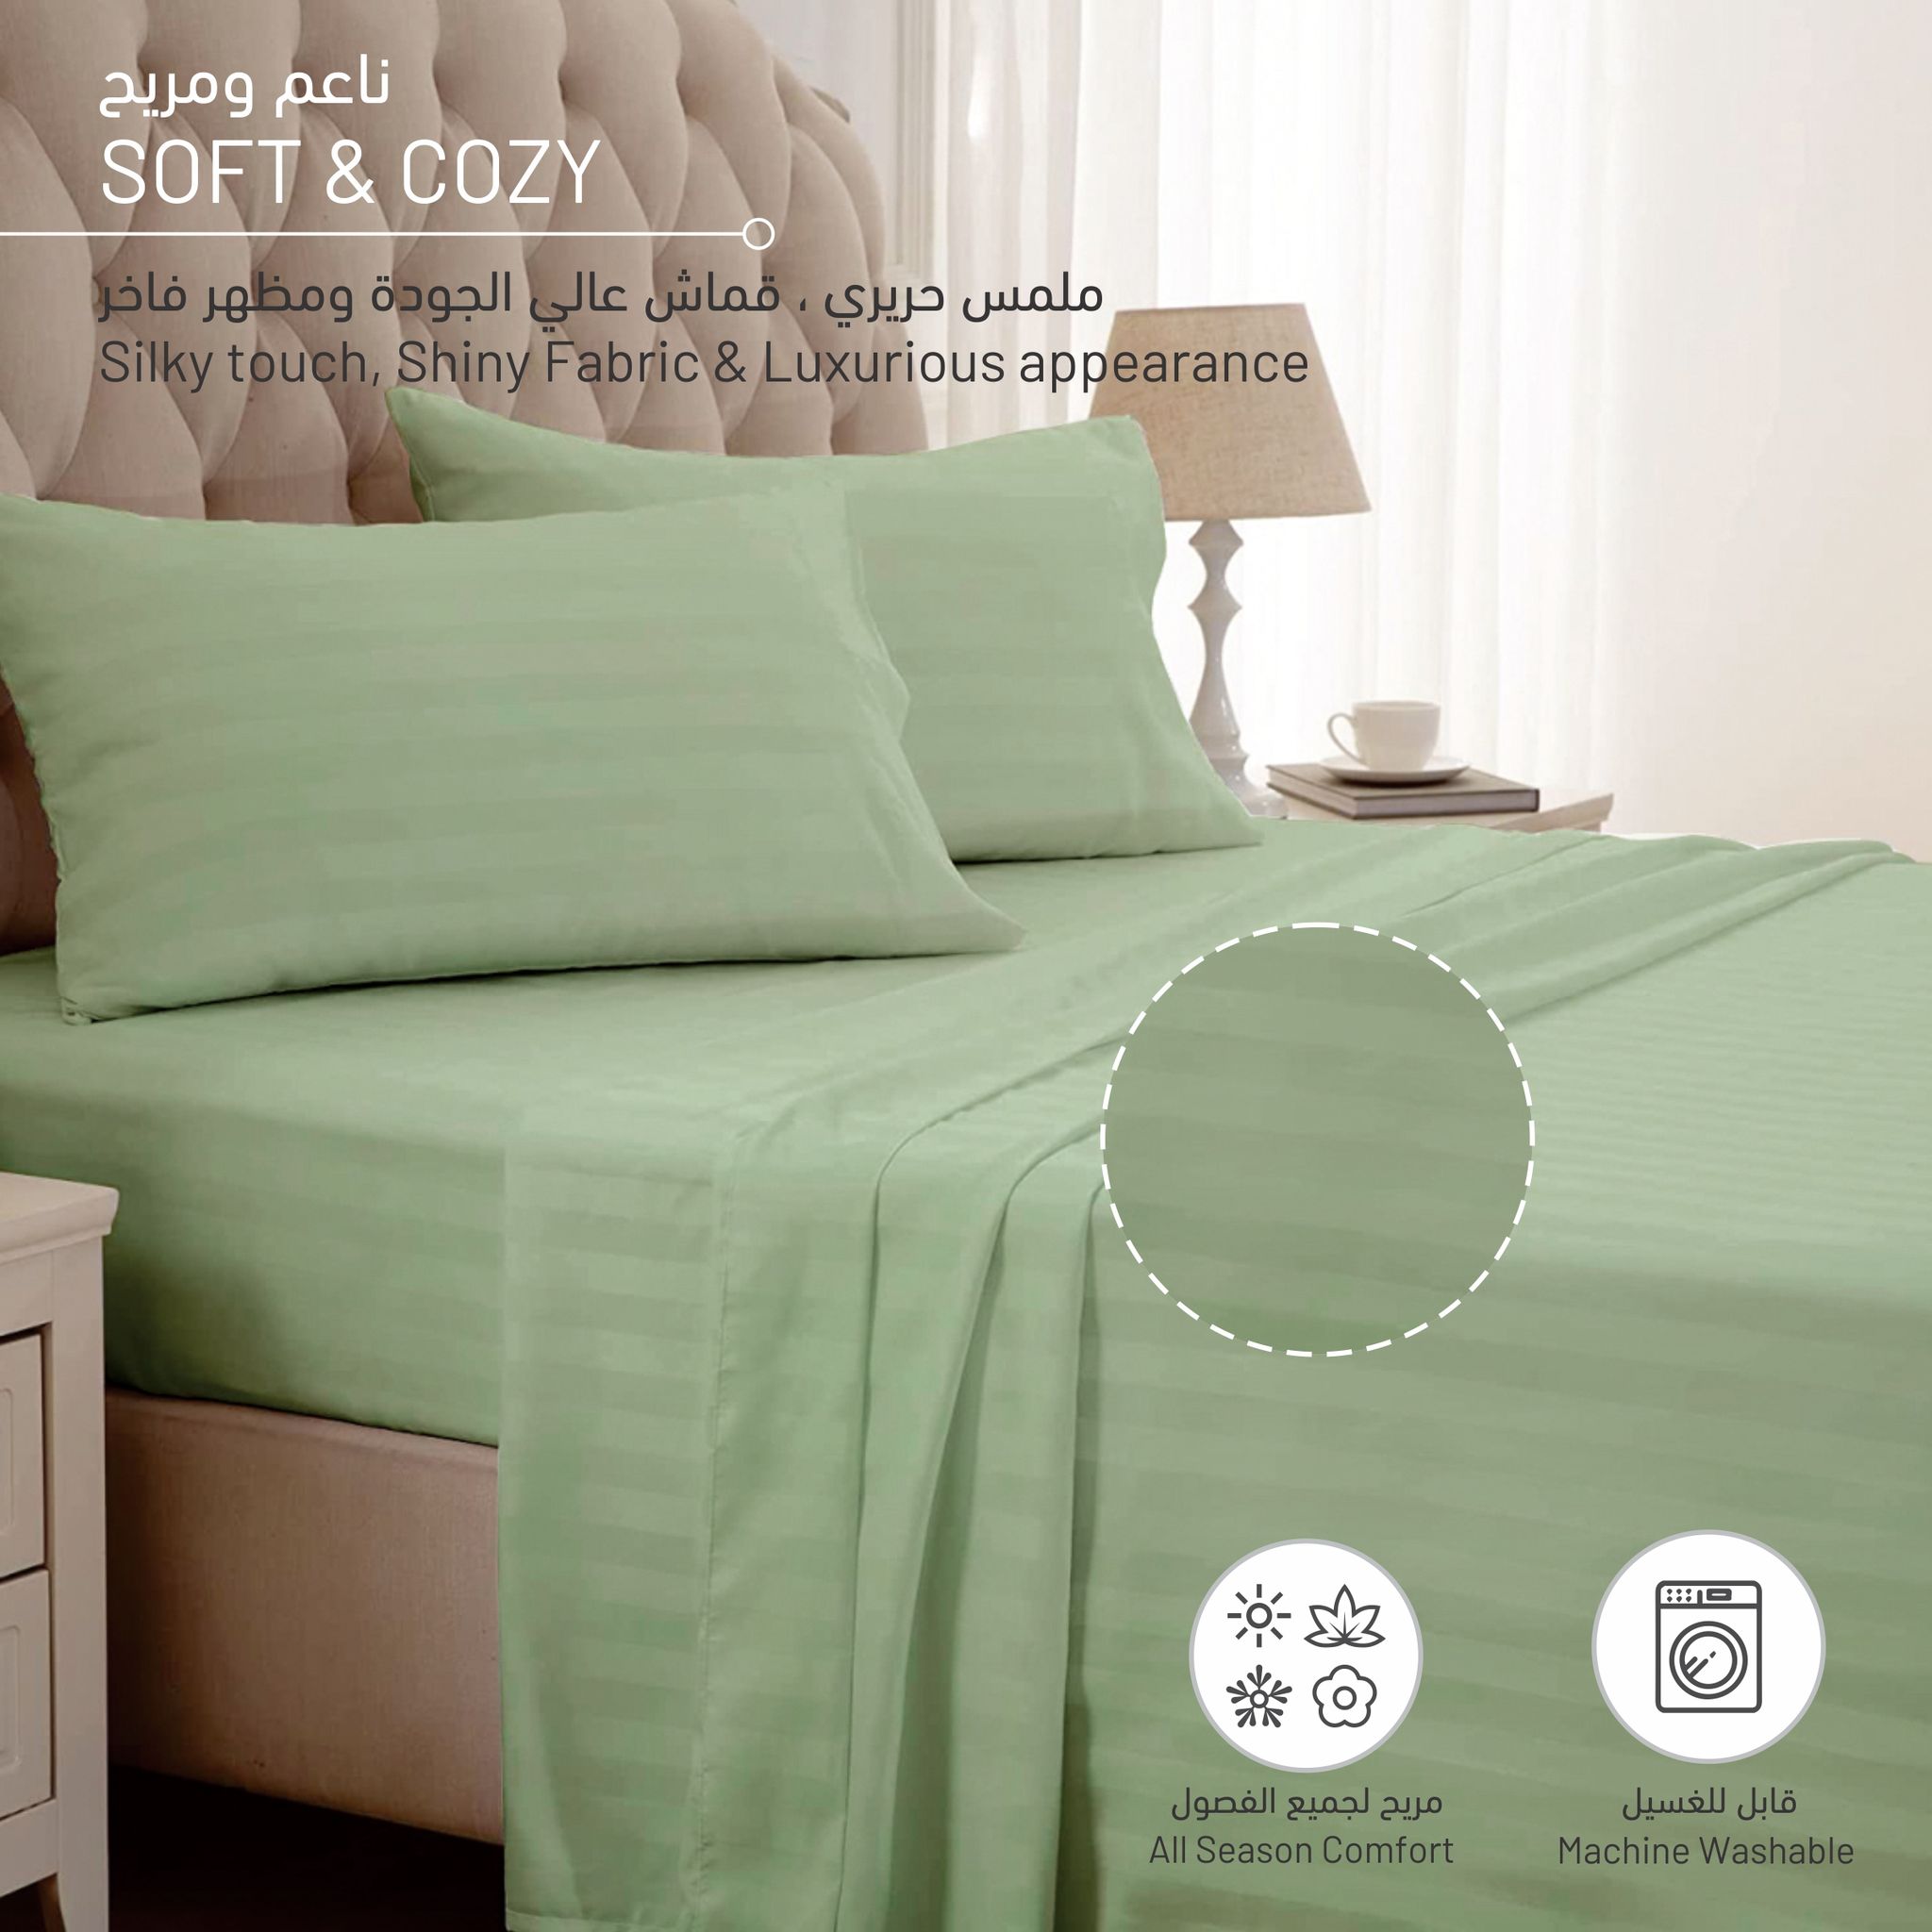 3 Pieces-Fitted Sheet Set  -200X203+35cm, 2 Pillow Case 50X75 cm - King  Sage green